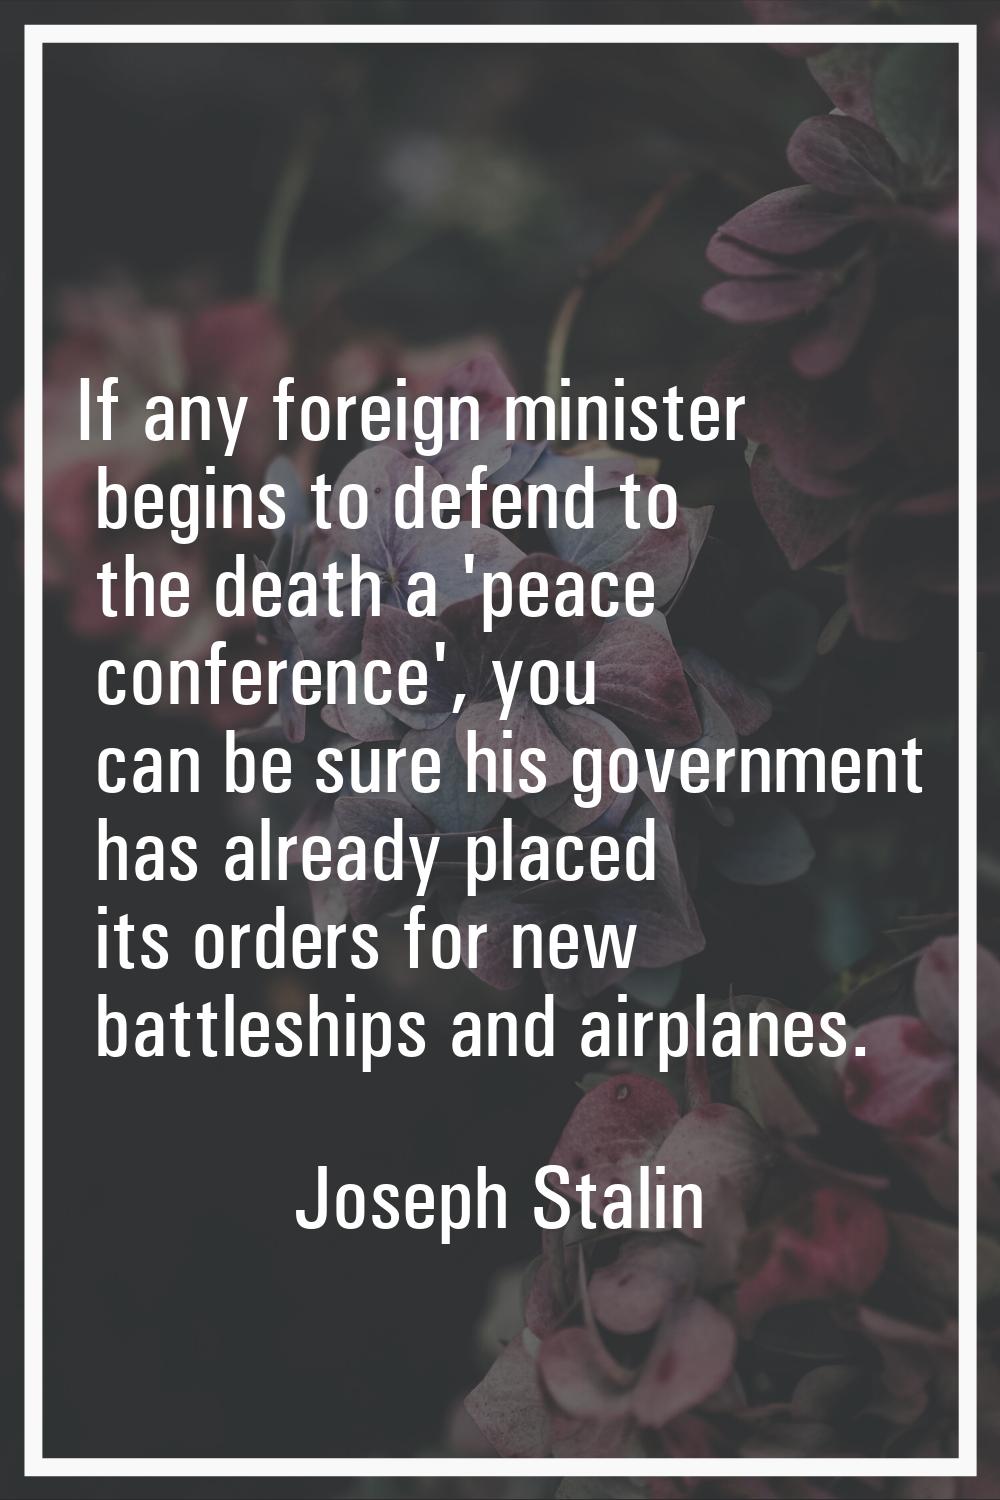 If any foreign minister begins to defend to the death a 'peace conference', you can be sure his gov